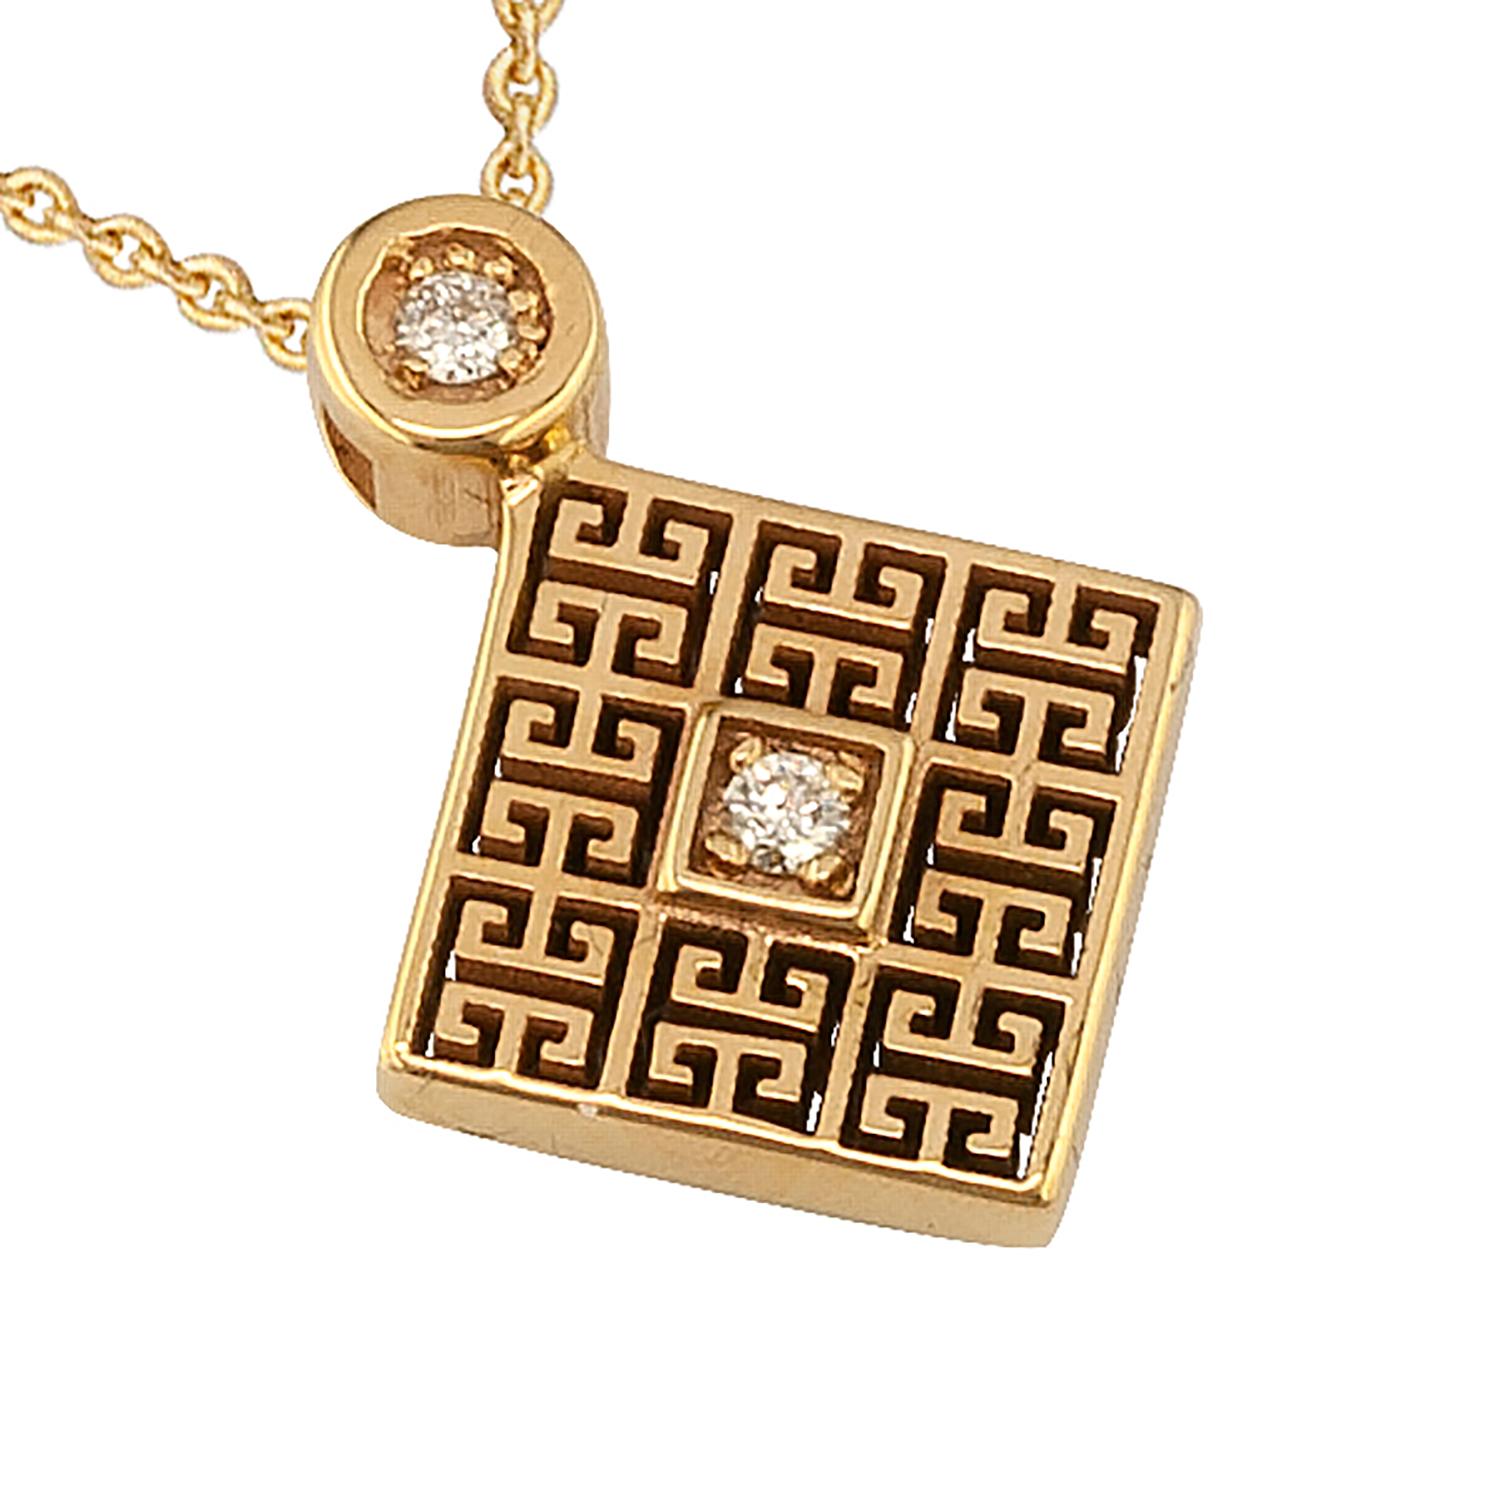 S.Georgios designer pendant enhancer and chain is handmade from solid 18 Karat Yellow Gold and carved forming a Greek Key design, which is the symbol of eternity. This stunning pendant features 2 brilliant-cut White Diamonds with a total weight of